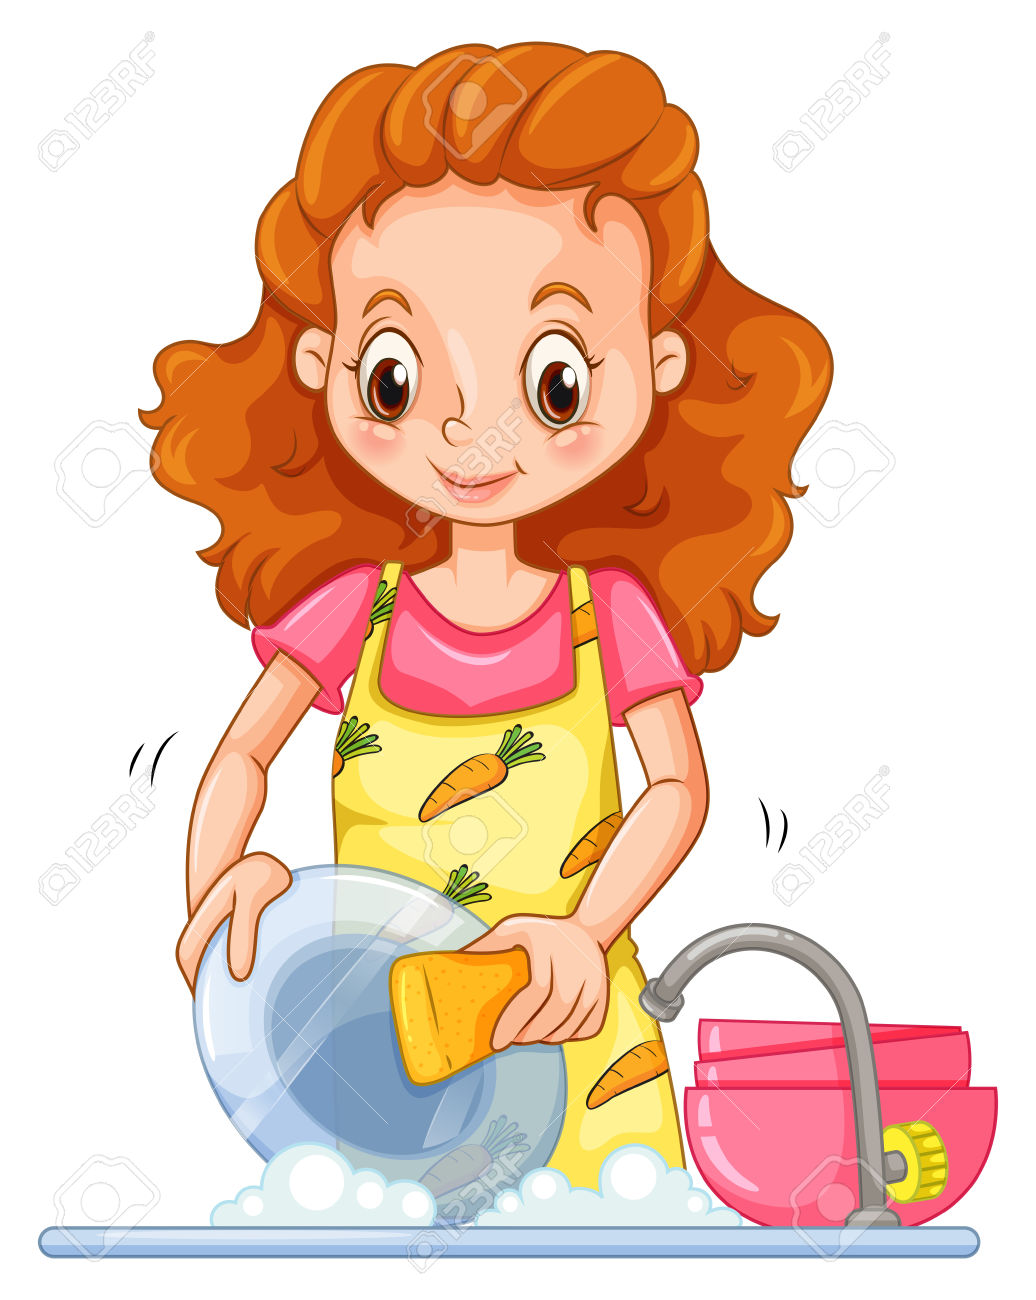 Washing dishes clipart 20 free Cliparts | Download images on Clipground